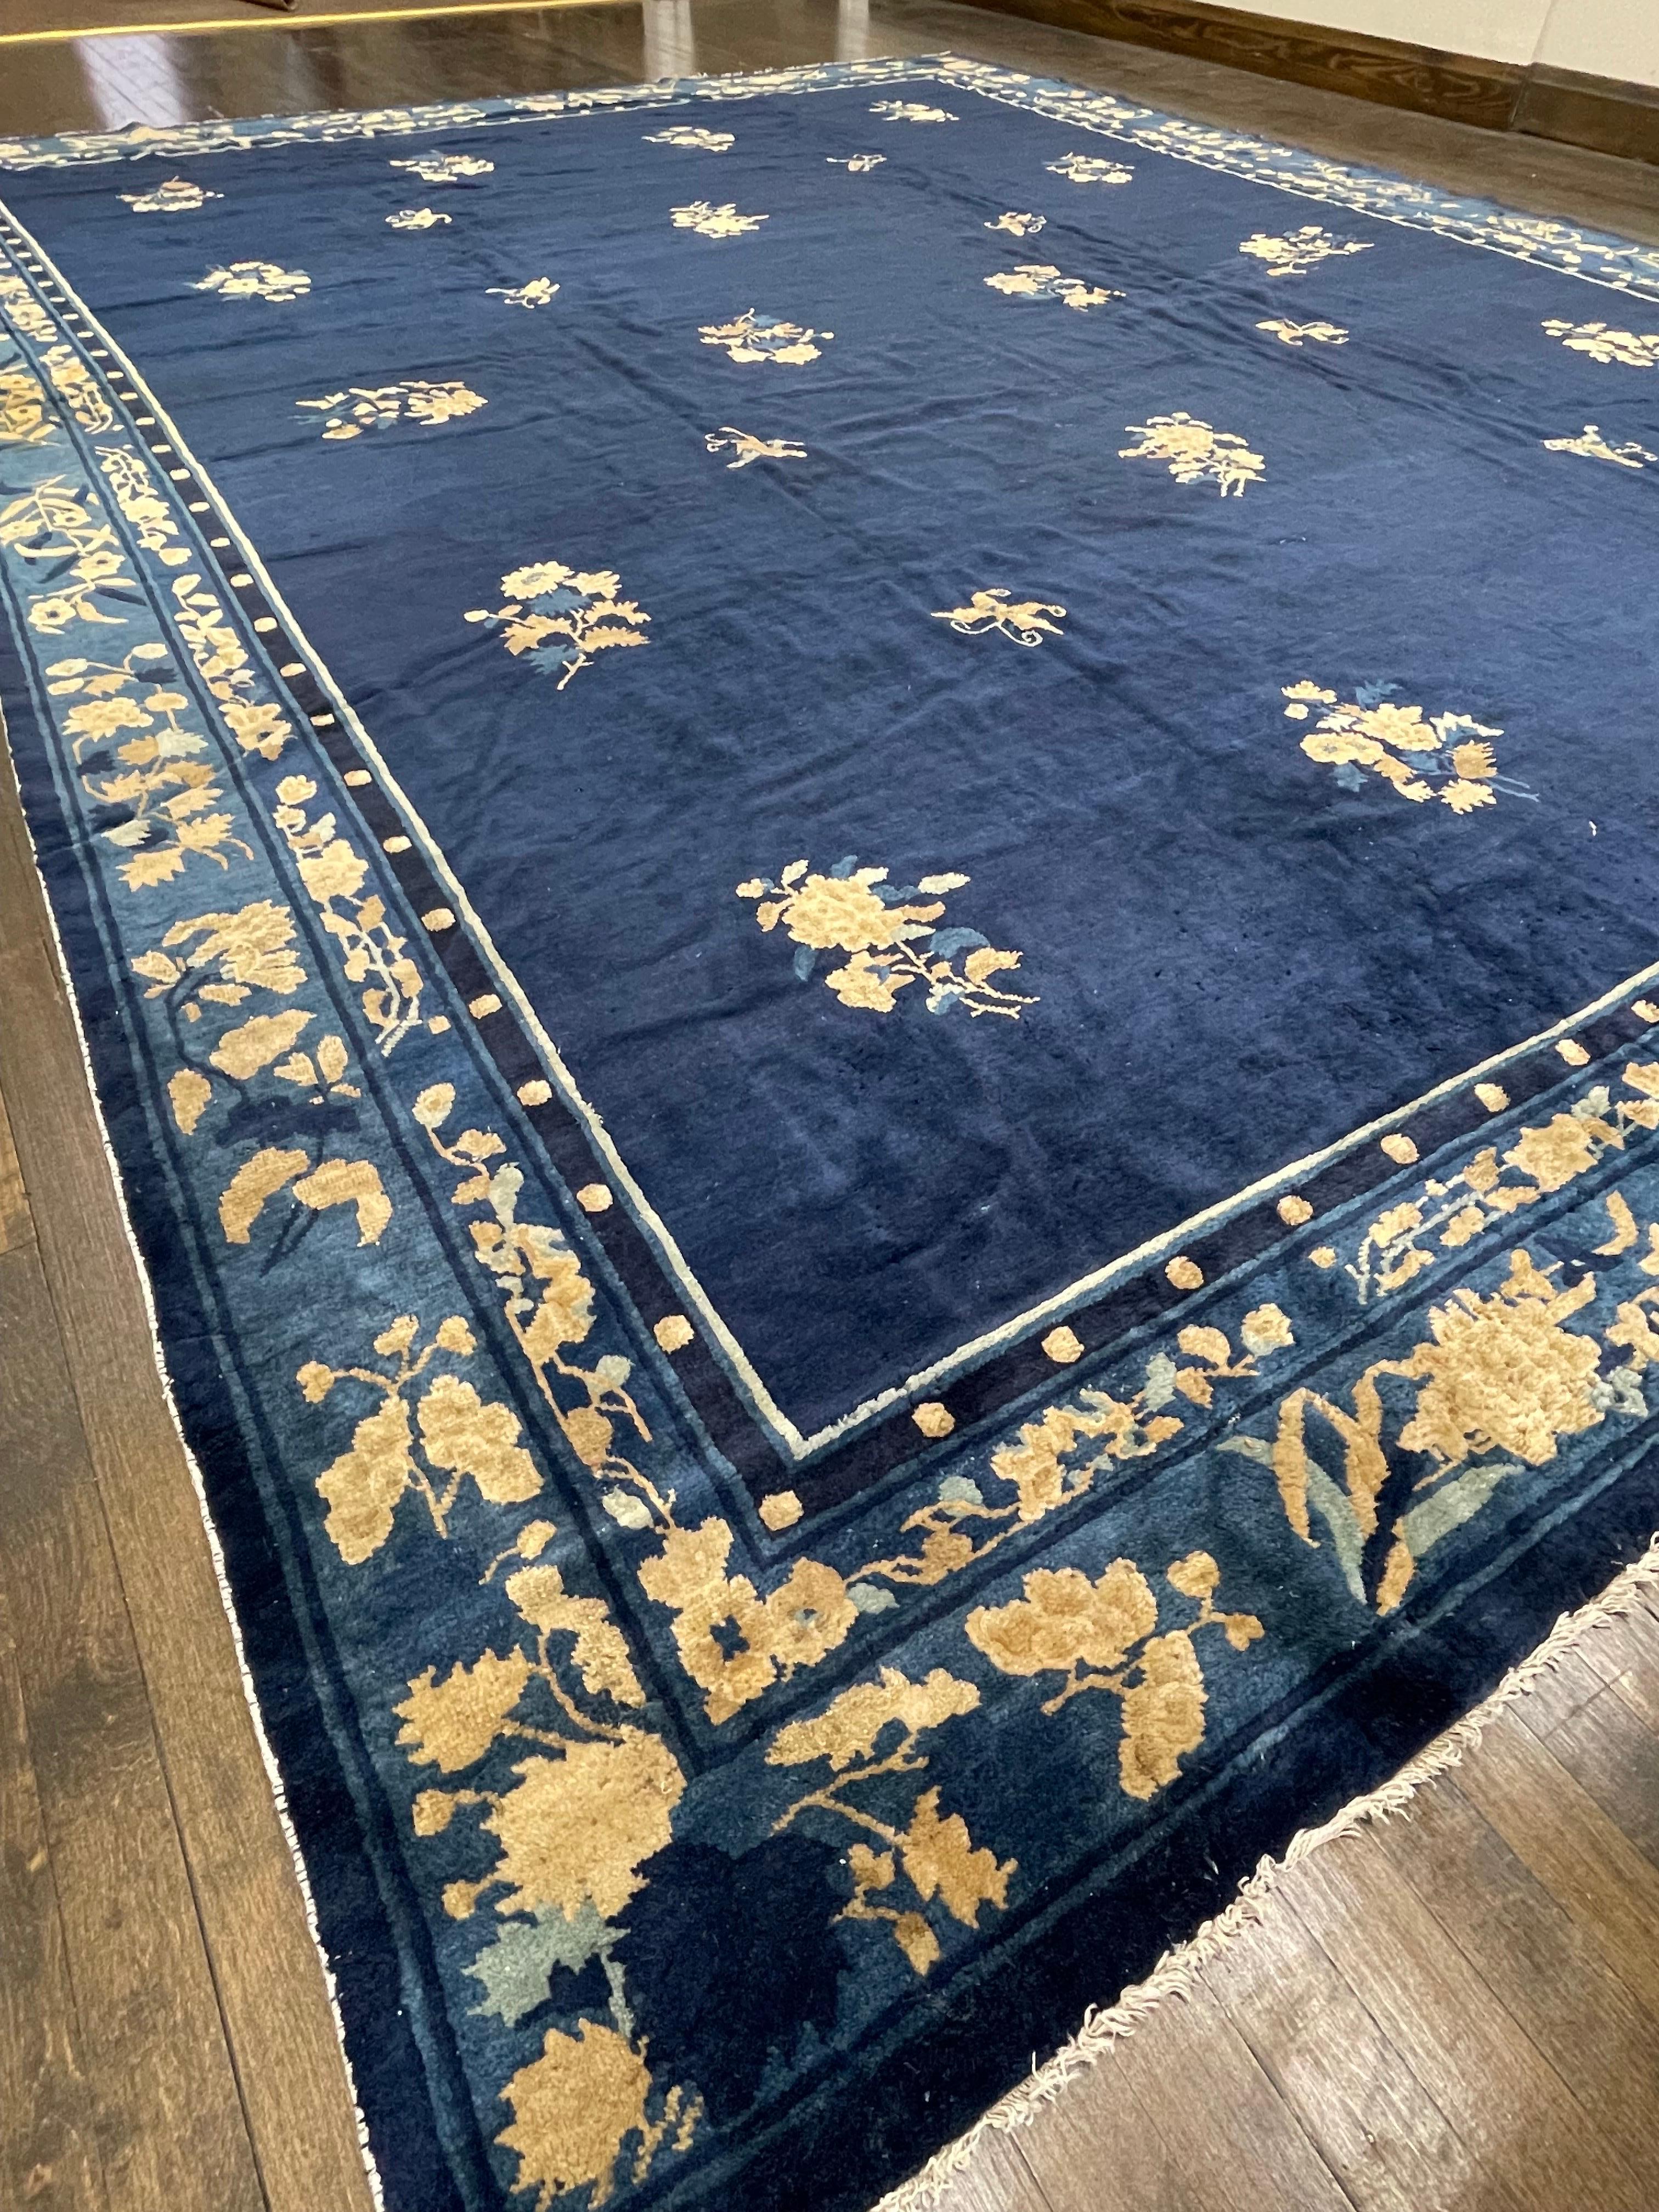 Vegetable Dyed Antique Chinese Peking Rug, Circa 1900 For Sale